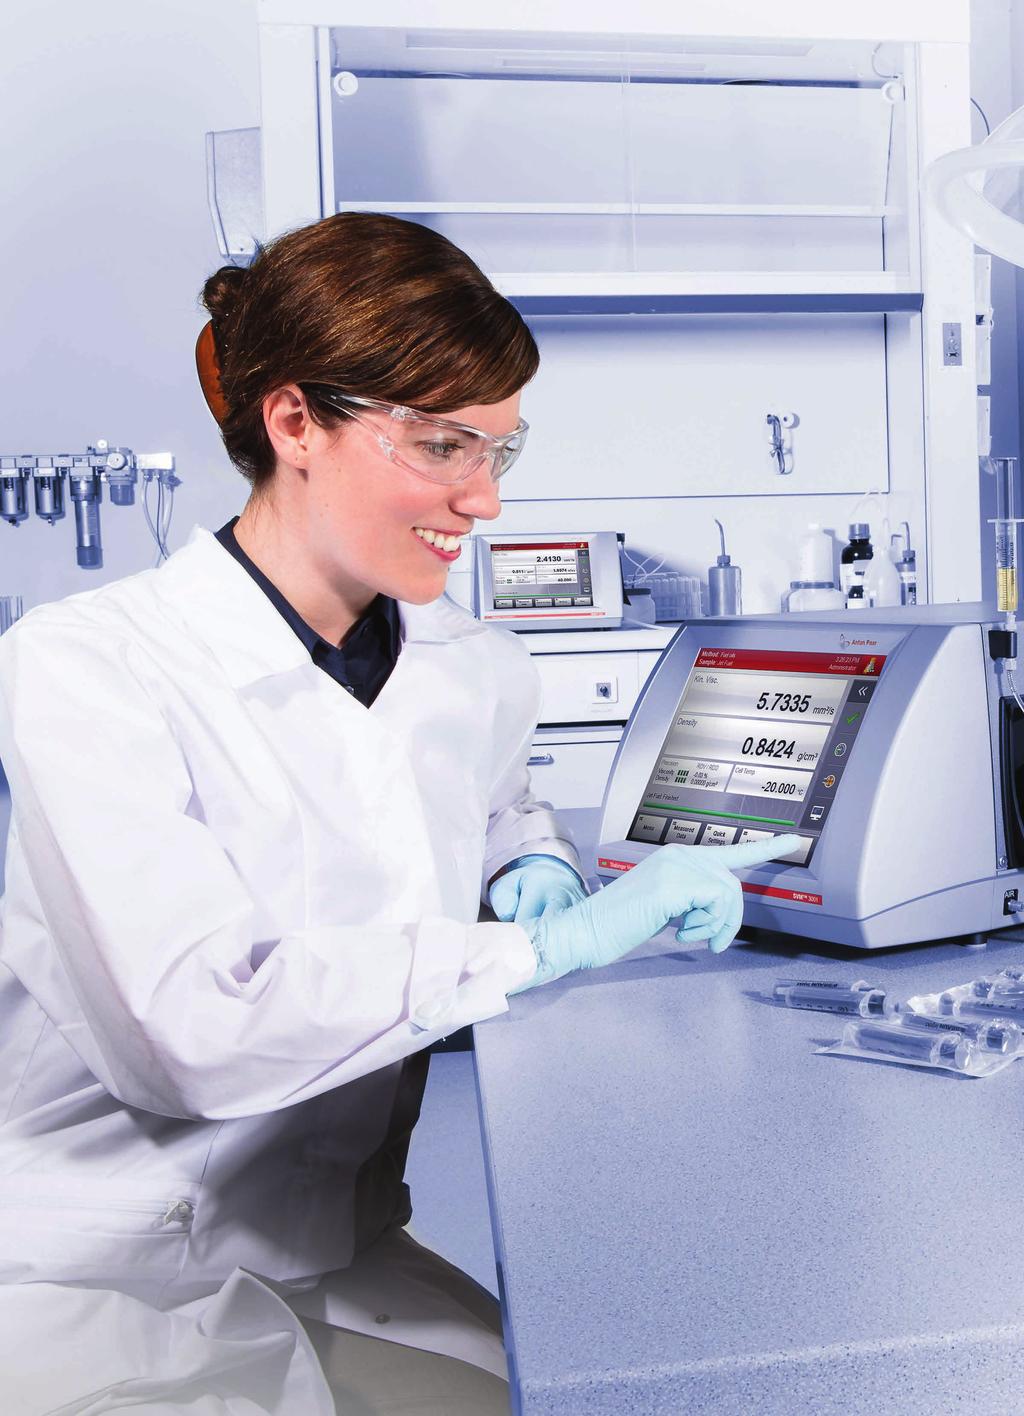 Expect more Measuring viscosity with an SVM is easy, fast and accurate.